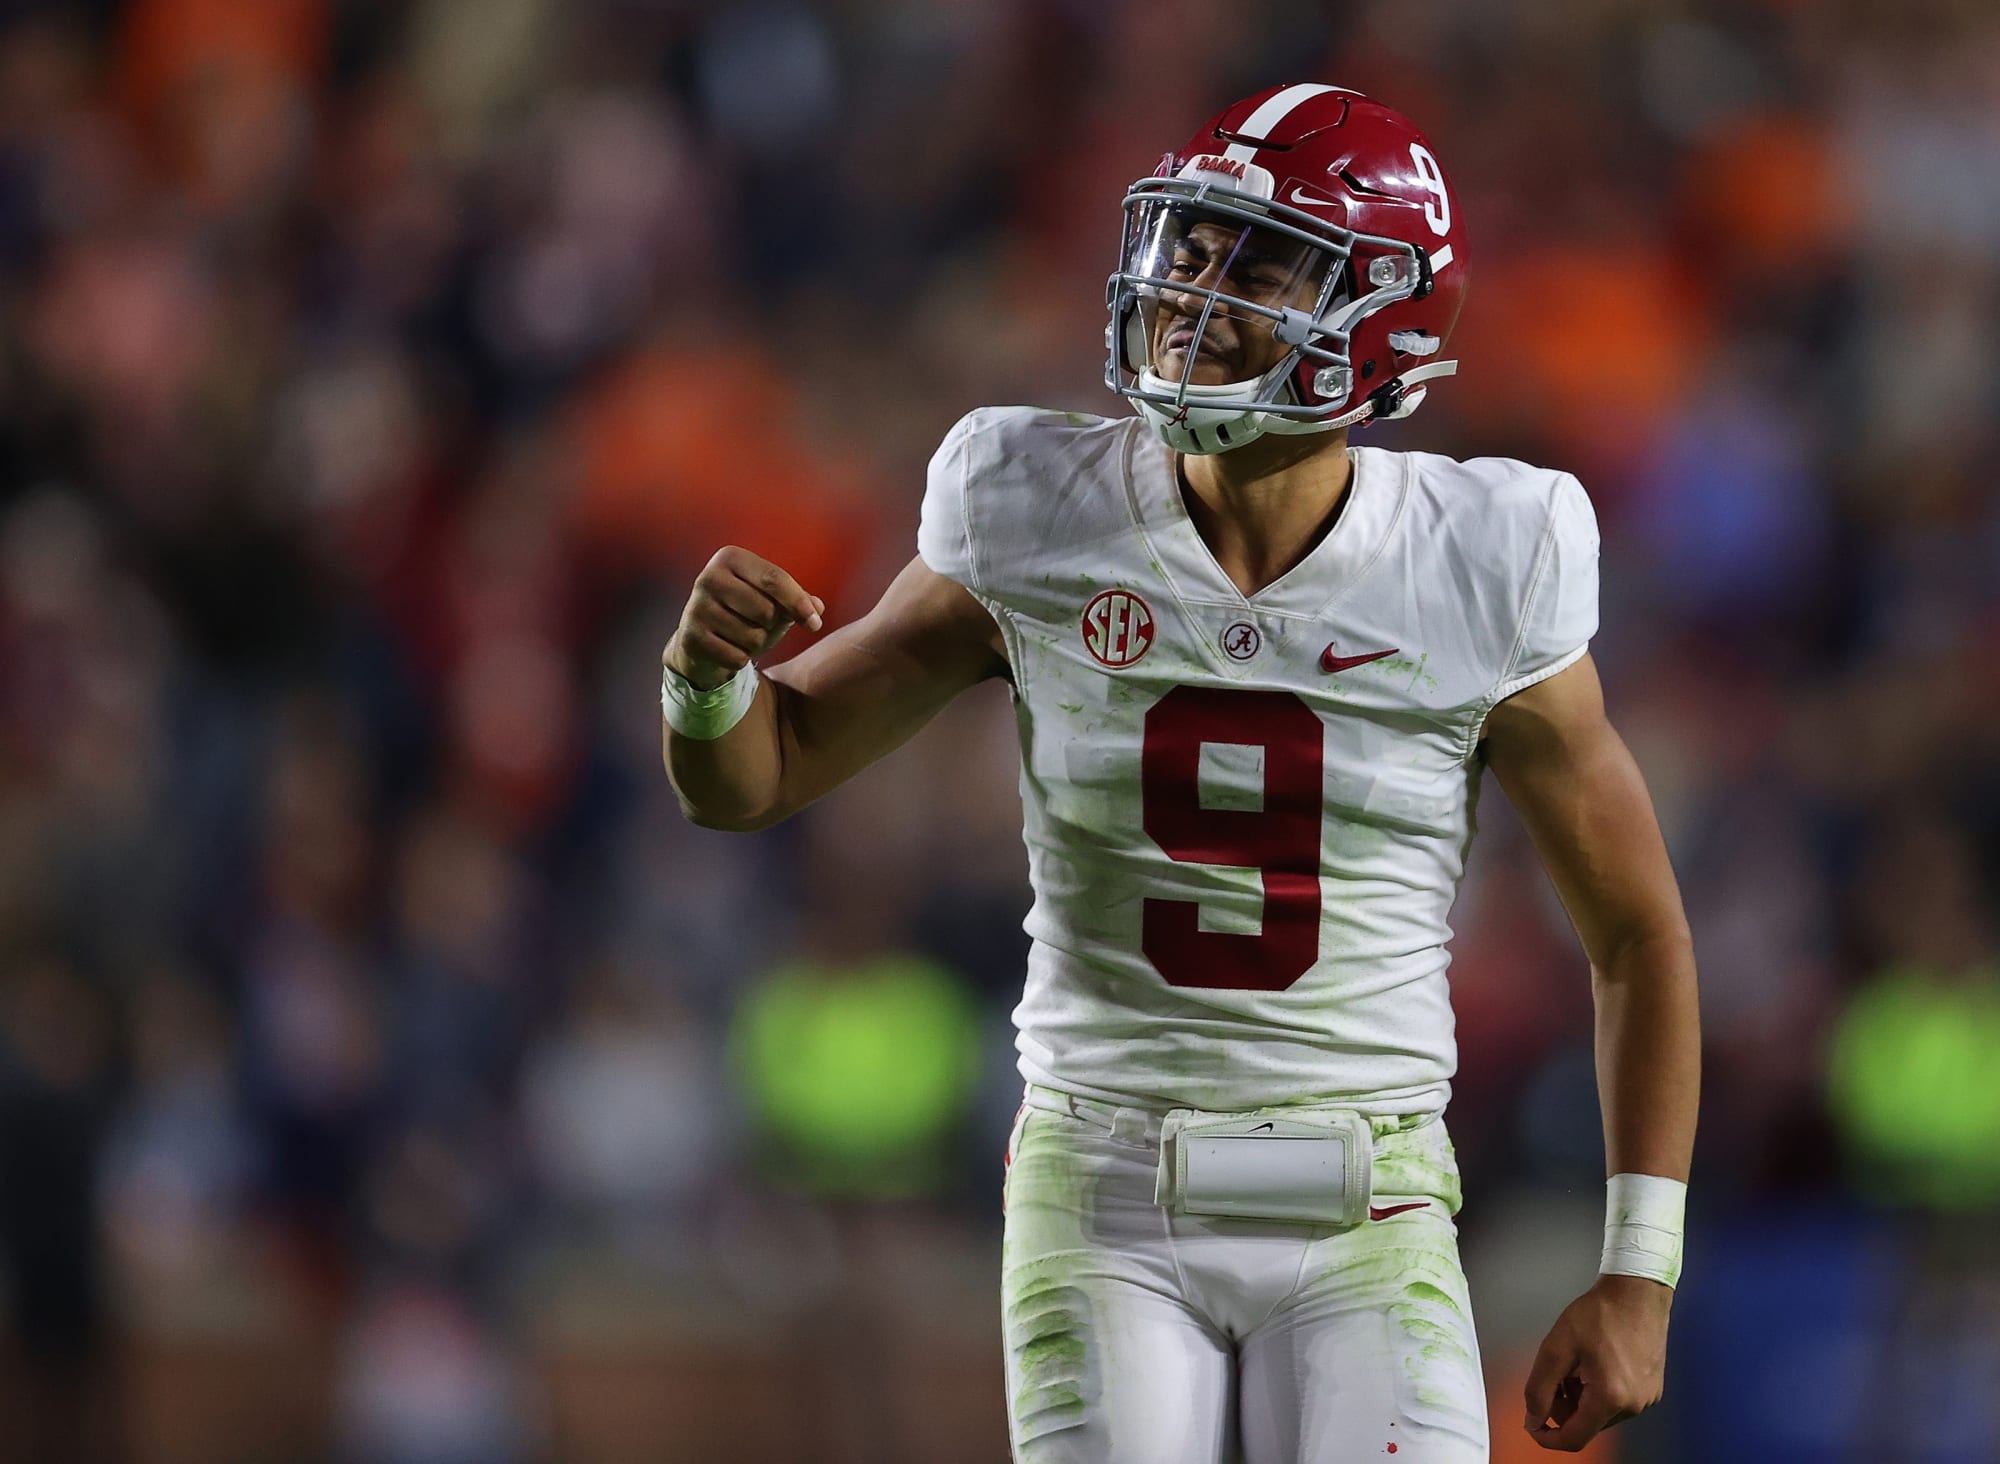 Looking at the top QB prospects in the 2023 NFL Draft class after Week 5